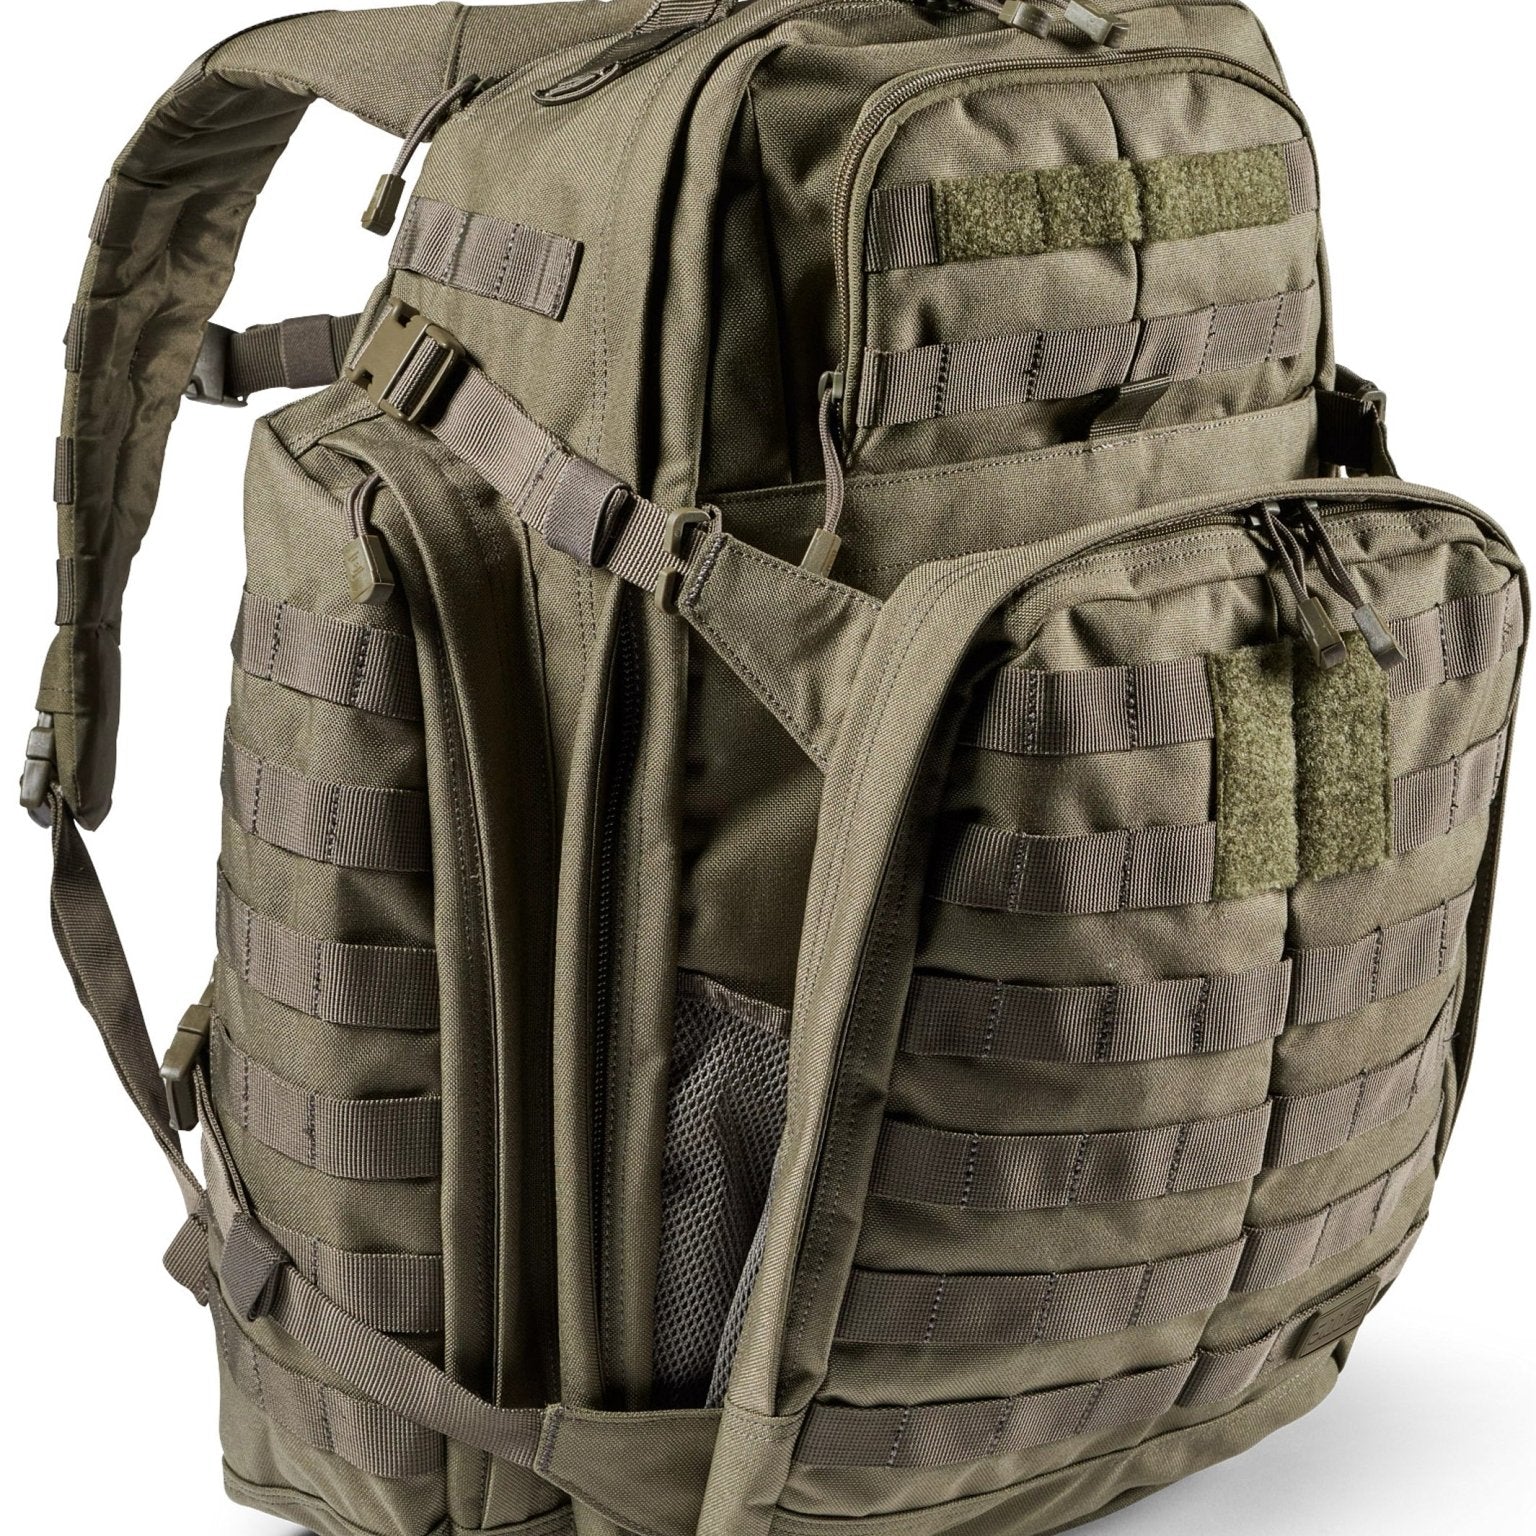 4elementsclothing5.11 Tactical5.11 Tactical - 5.11 Tactical Rush 72 2.0 Backpack - Style 56565Bag56565-186